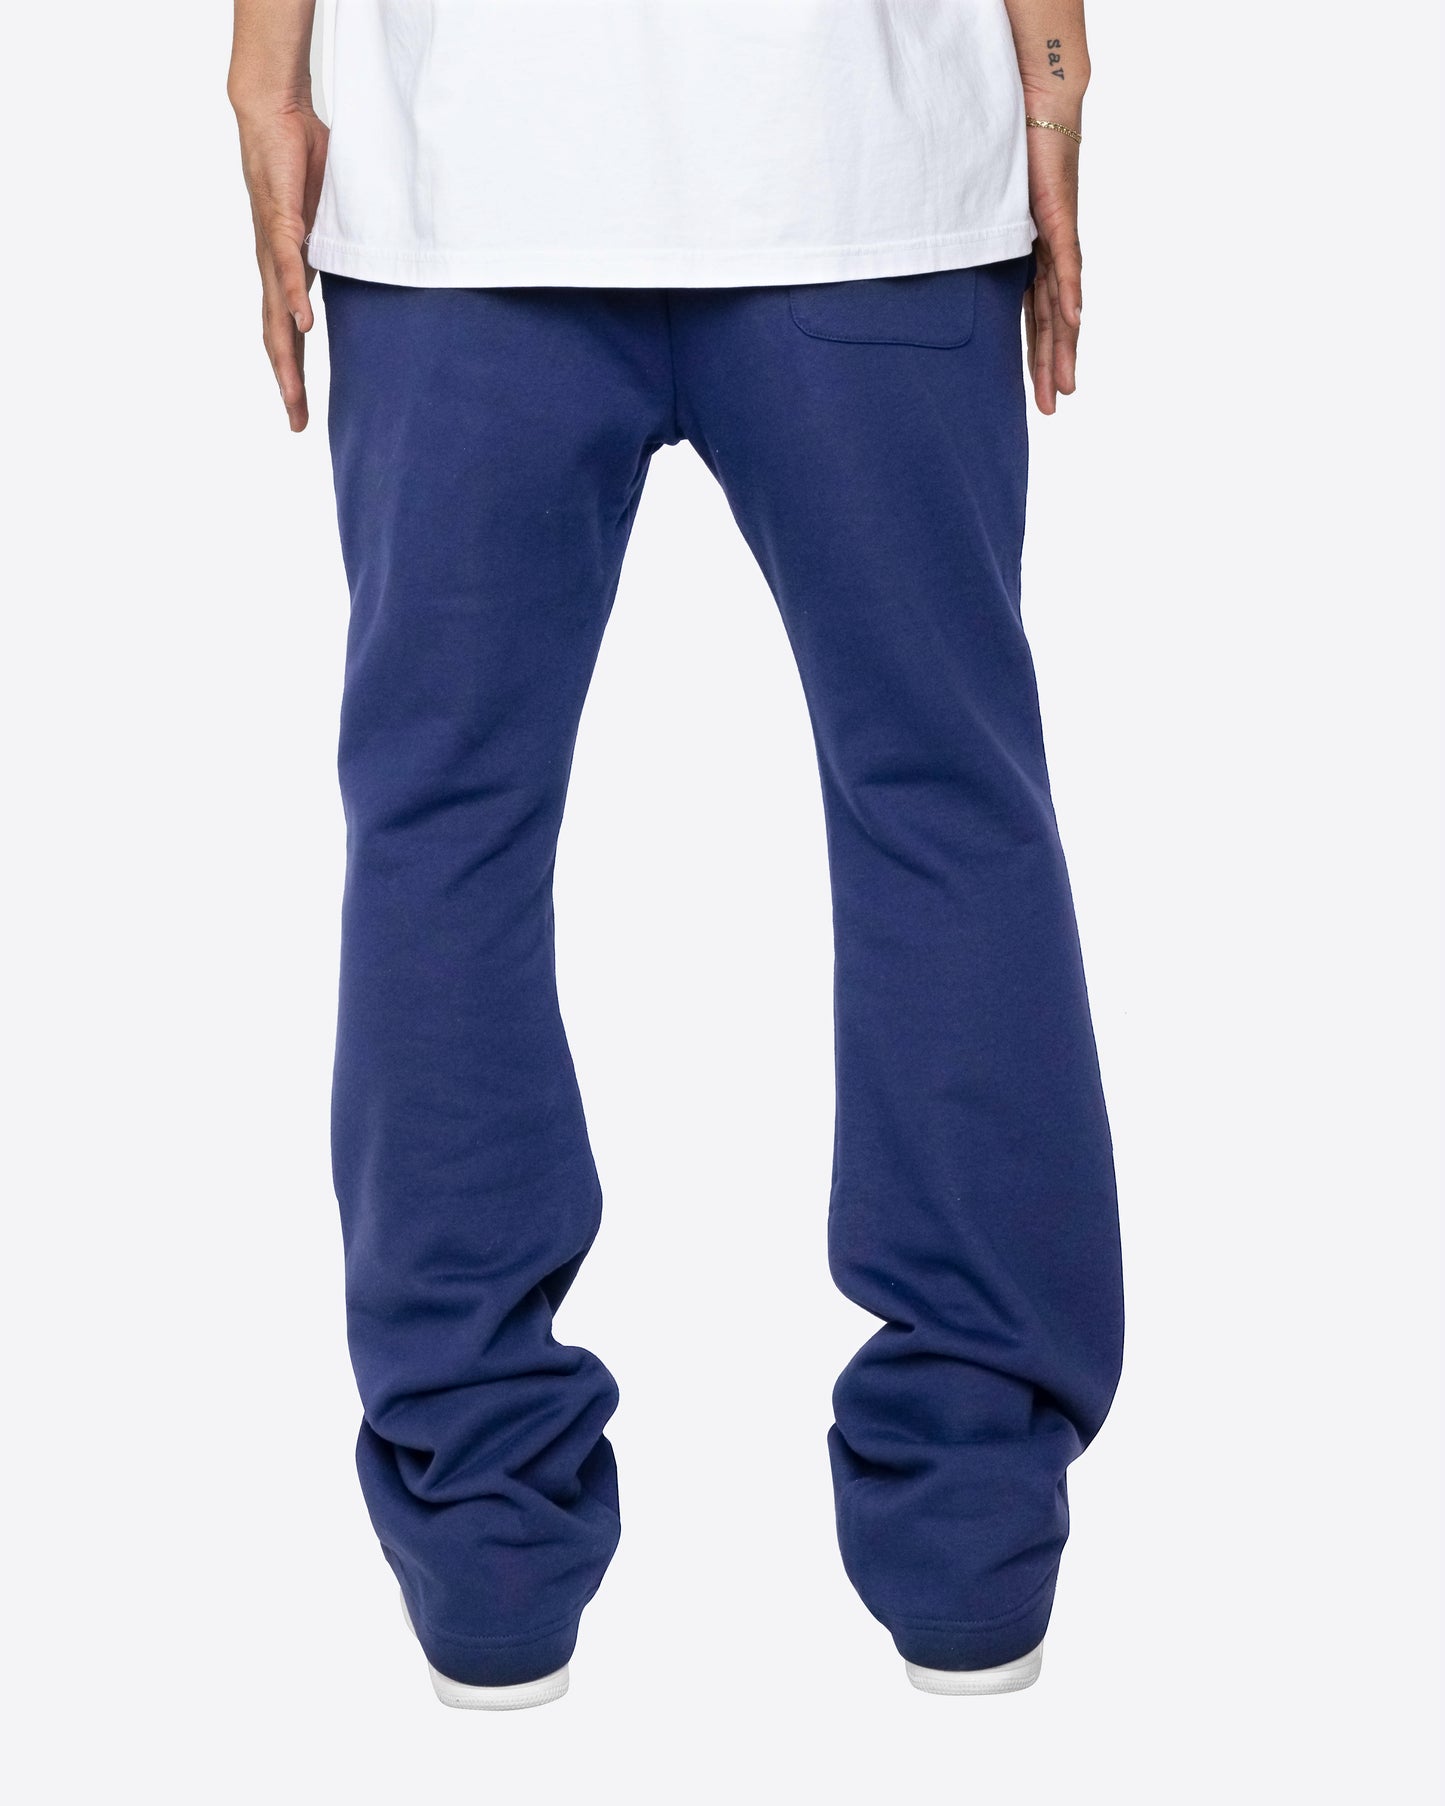 PERFECT FLARE SWEATPANTS-NAVY – EPTM.